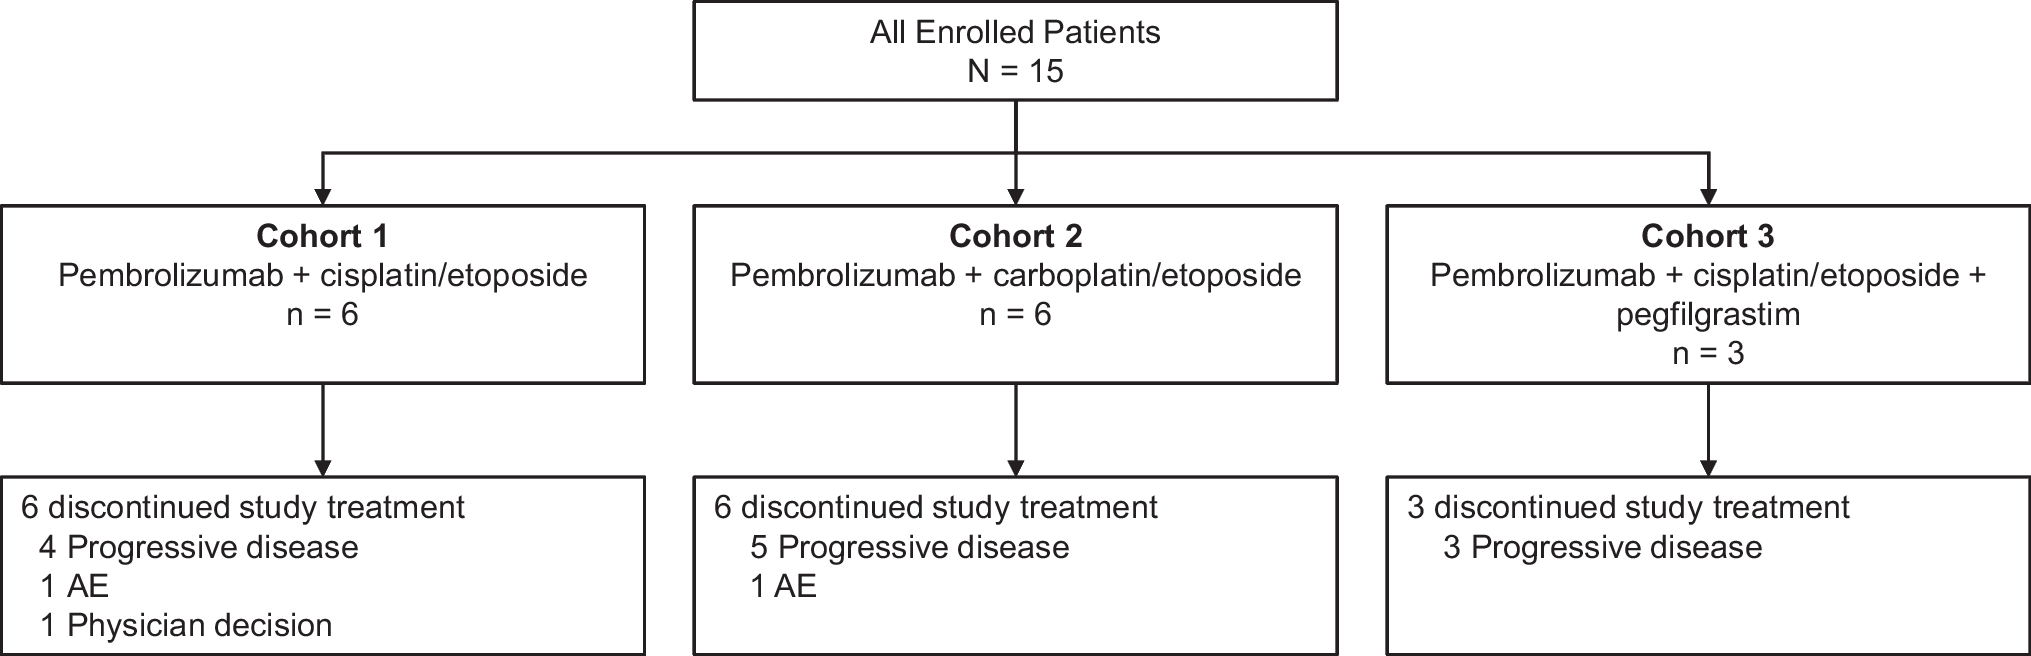 Phase 1 study of pembrolizumab plus chemotherapy in Japanese patients with extensive-stage small-cell lung cancer